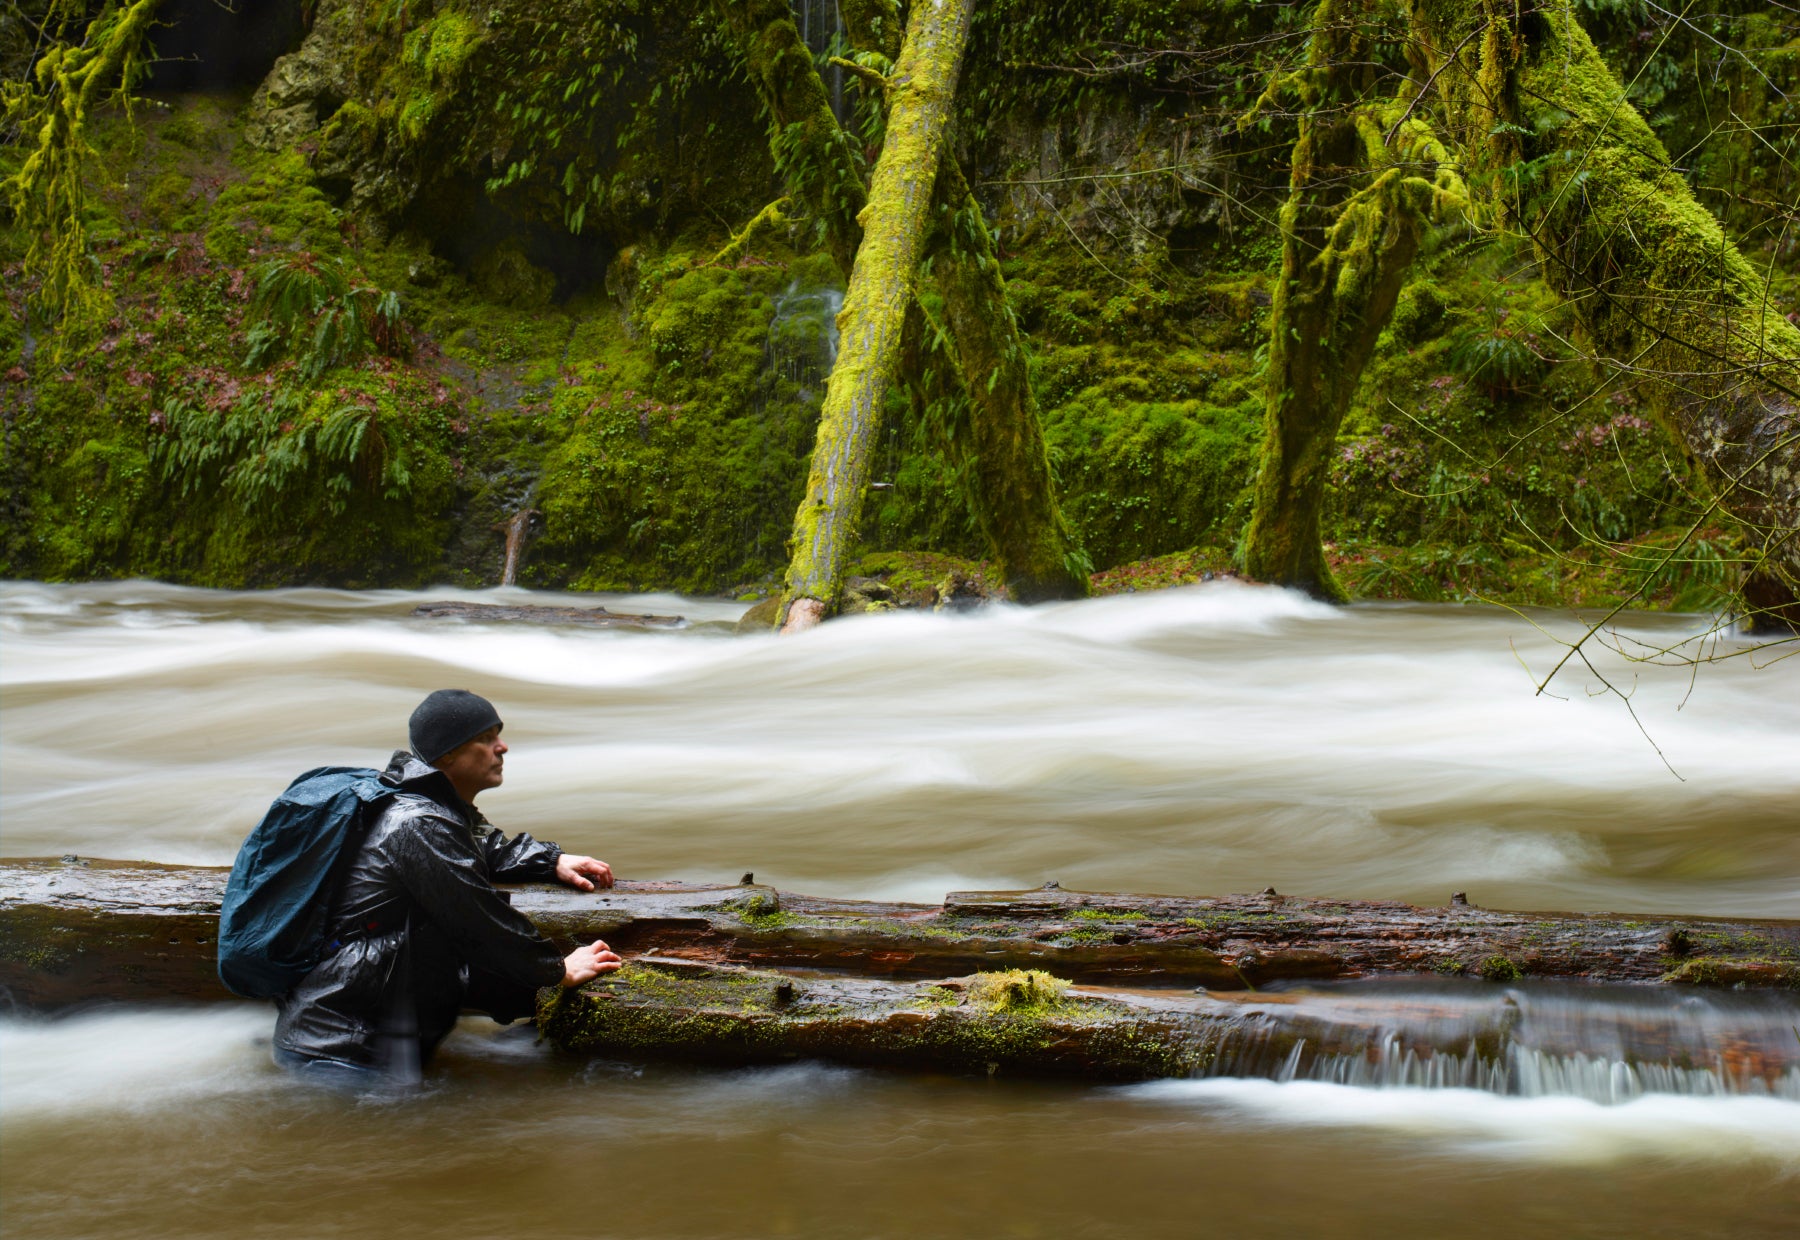 Portrait of Peter Lik wading waist deep in the rapids of the Columbia River Gorge in Oregon with electric green moss on the trees along the coast